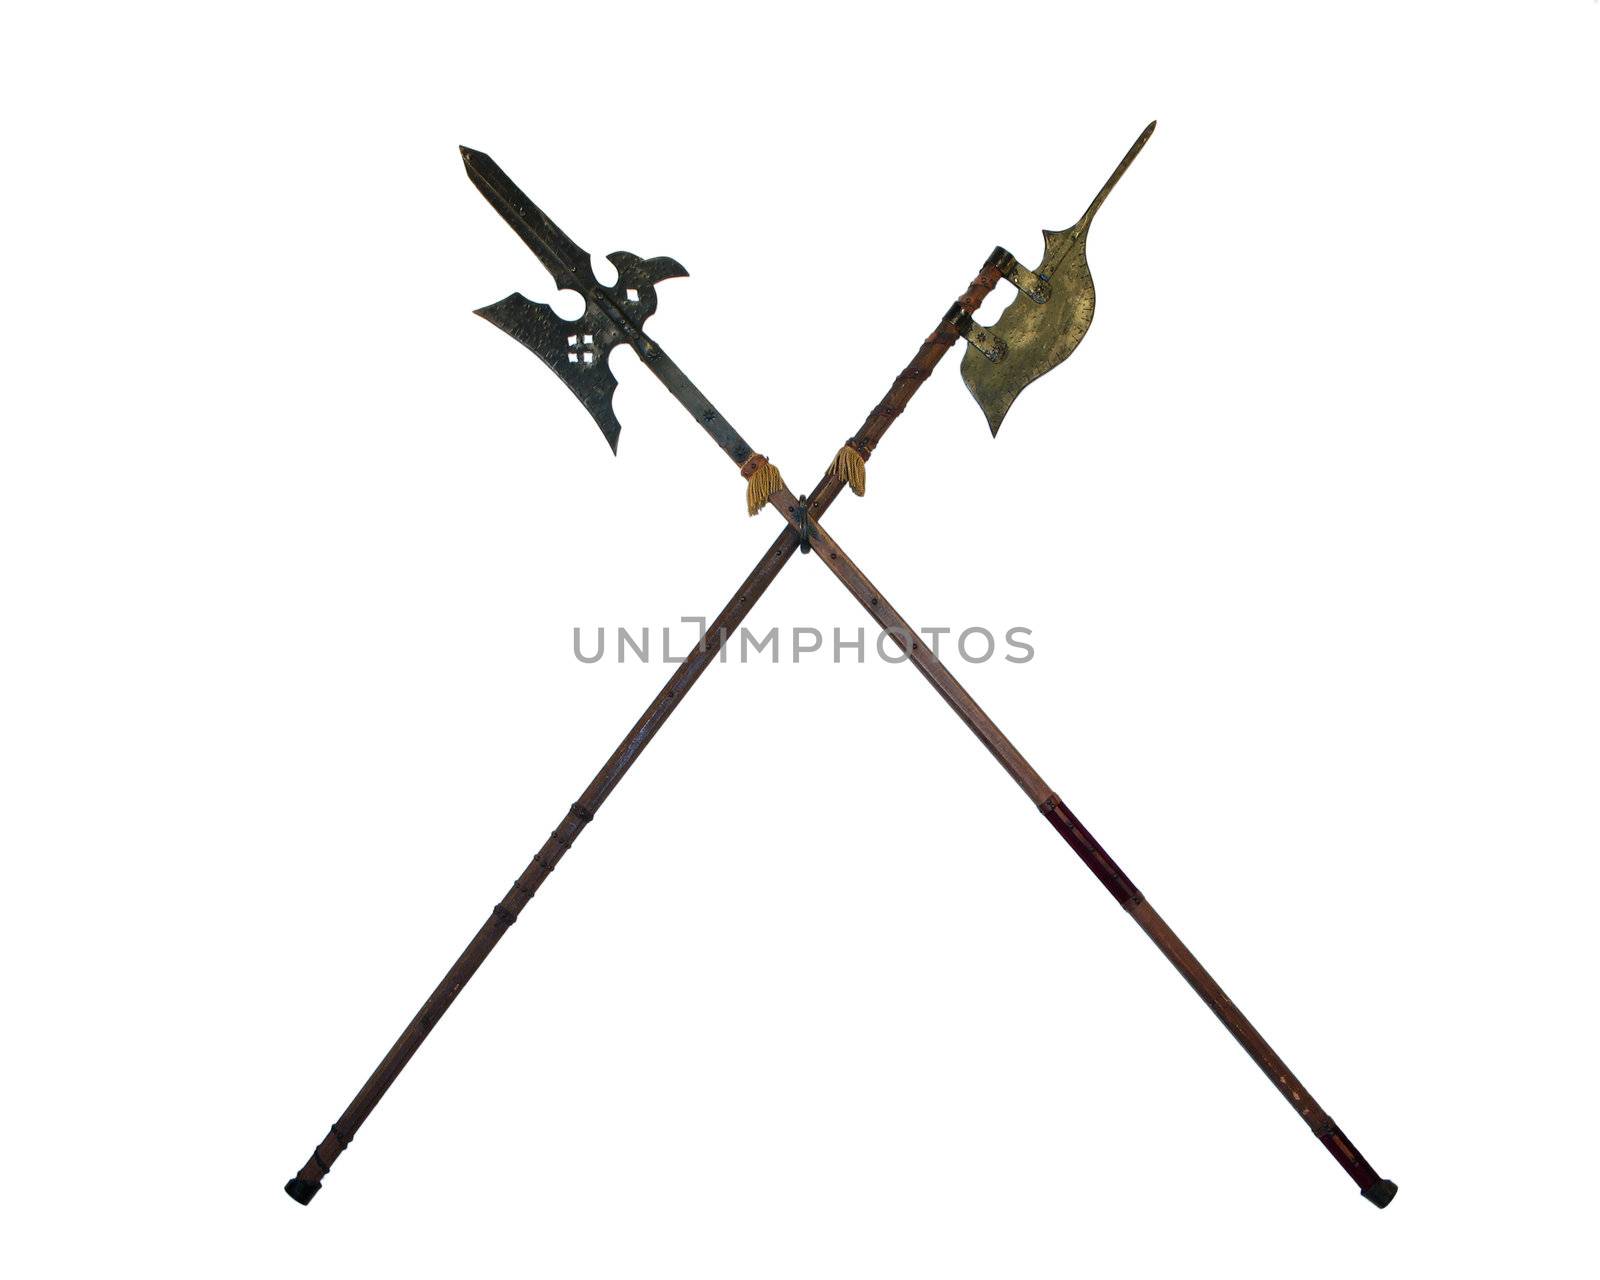 Ancient halberds isolated on white